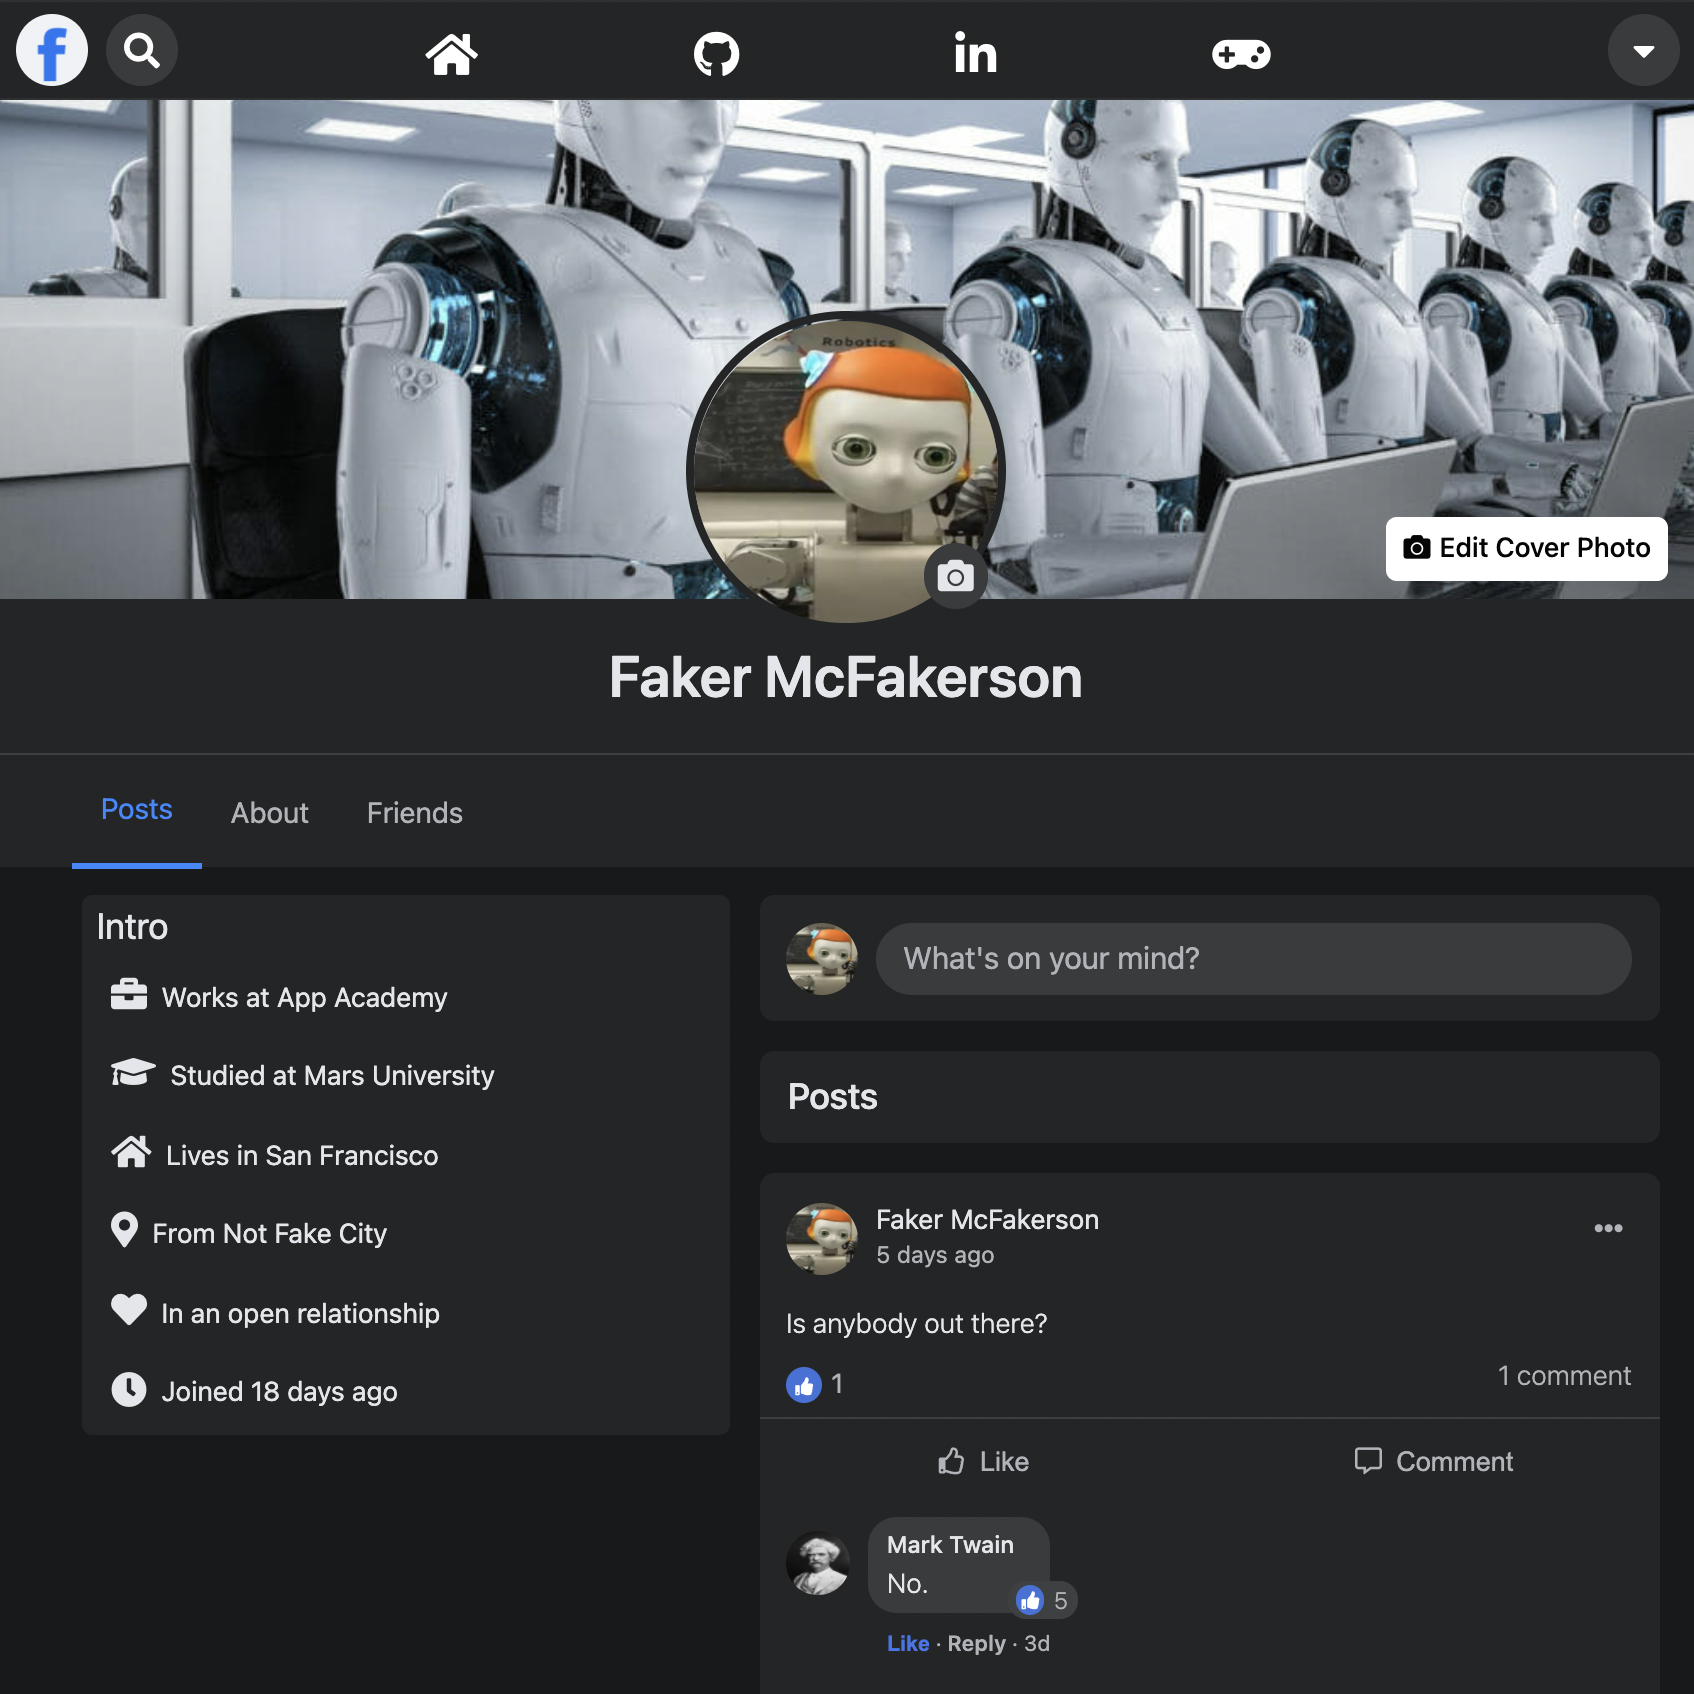 An image from Facenook containing a profile page with some posts visible.